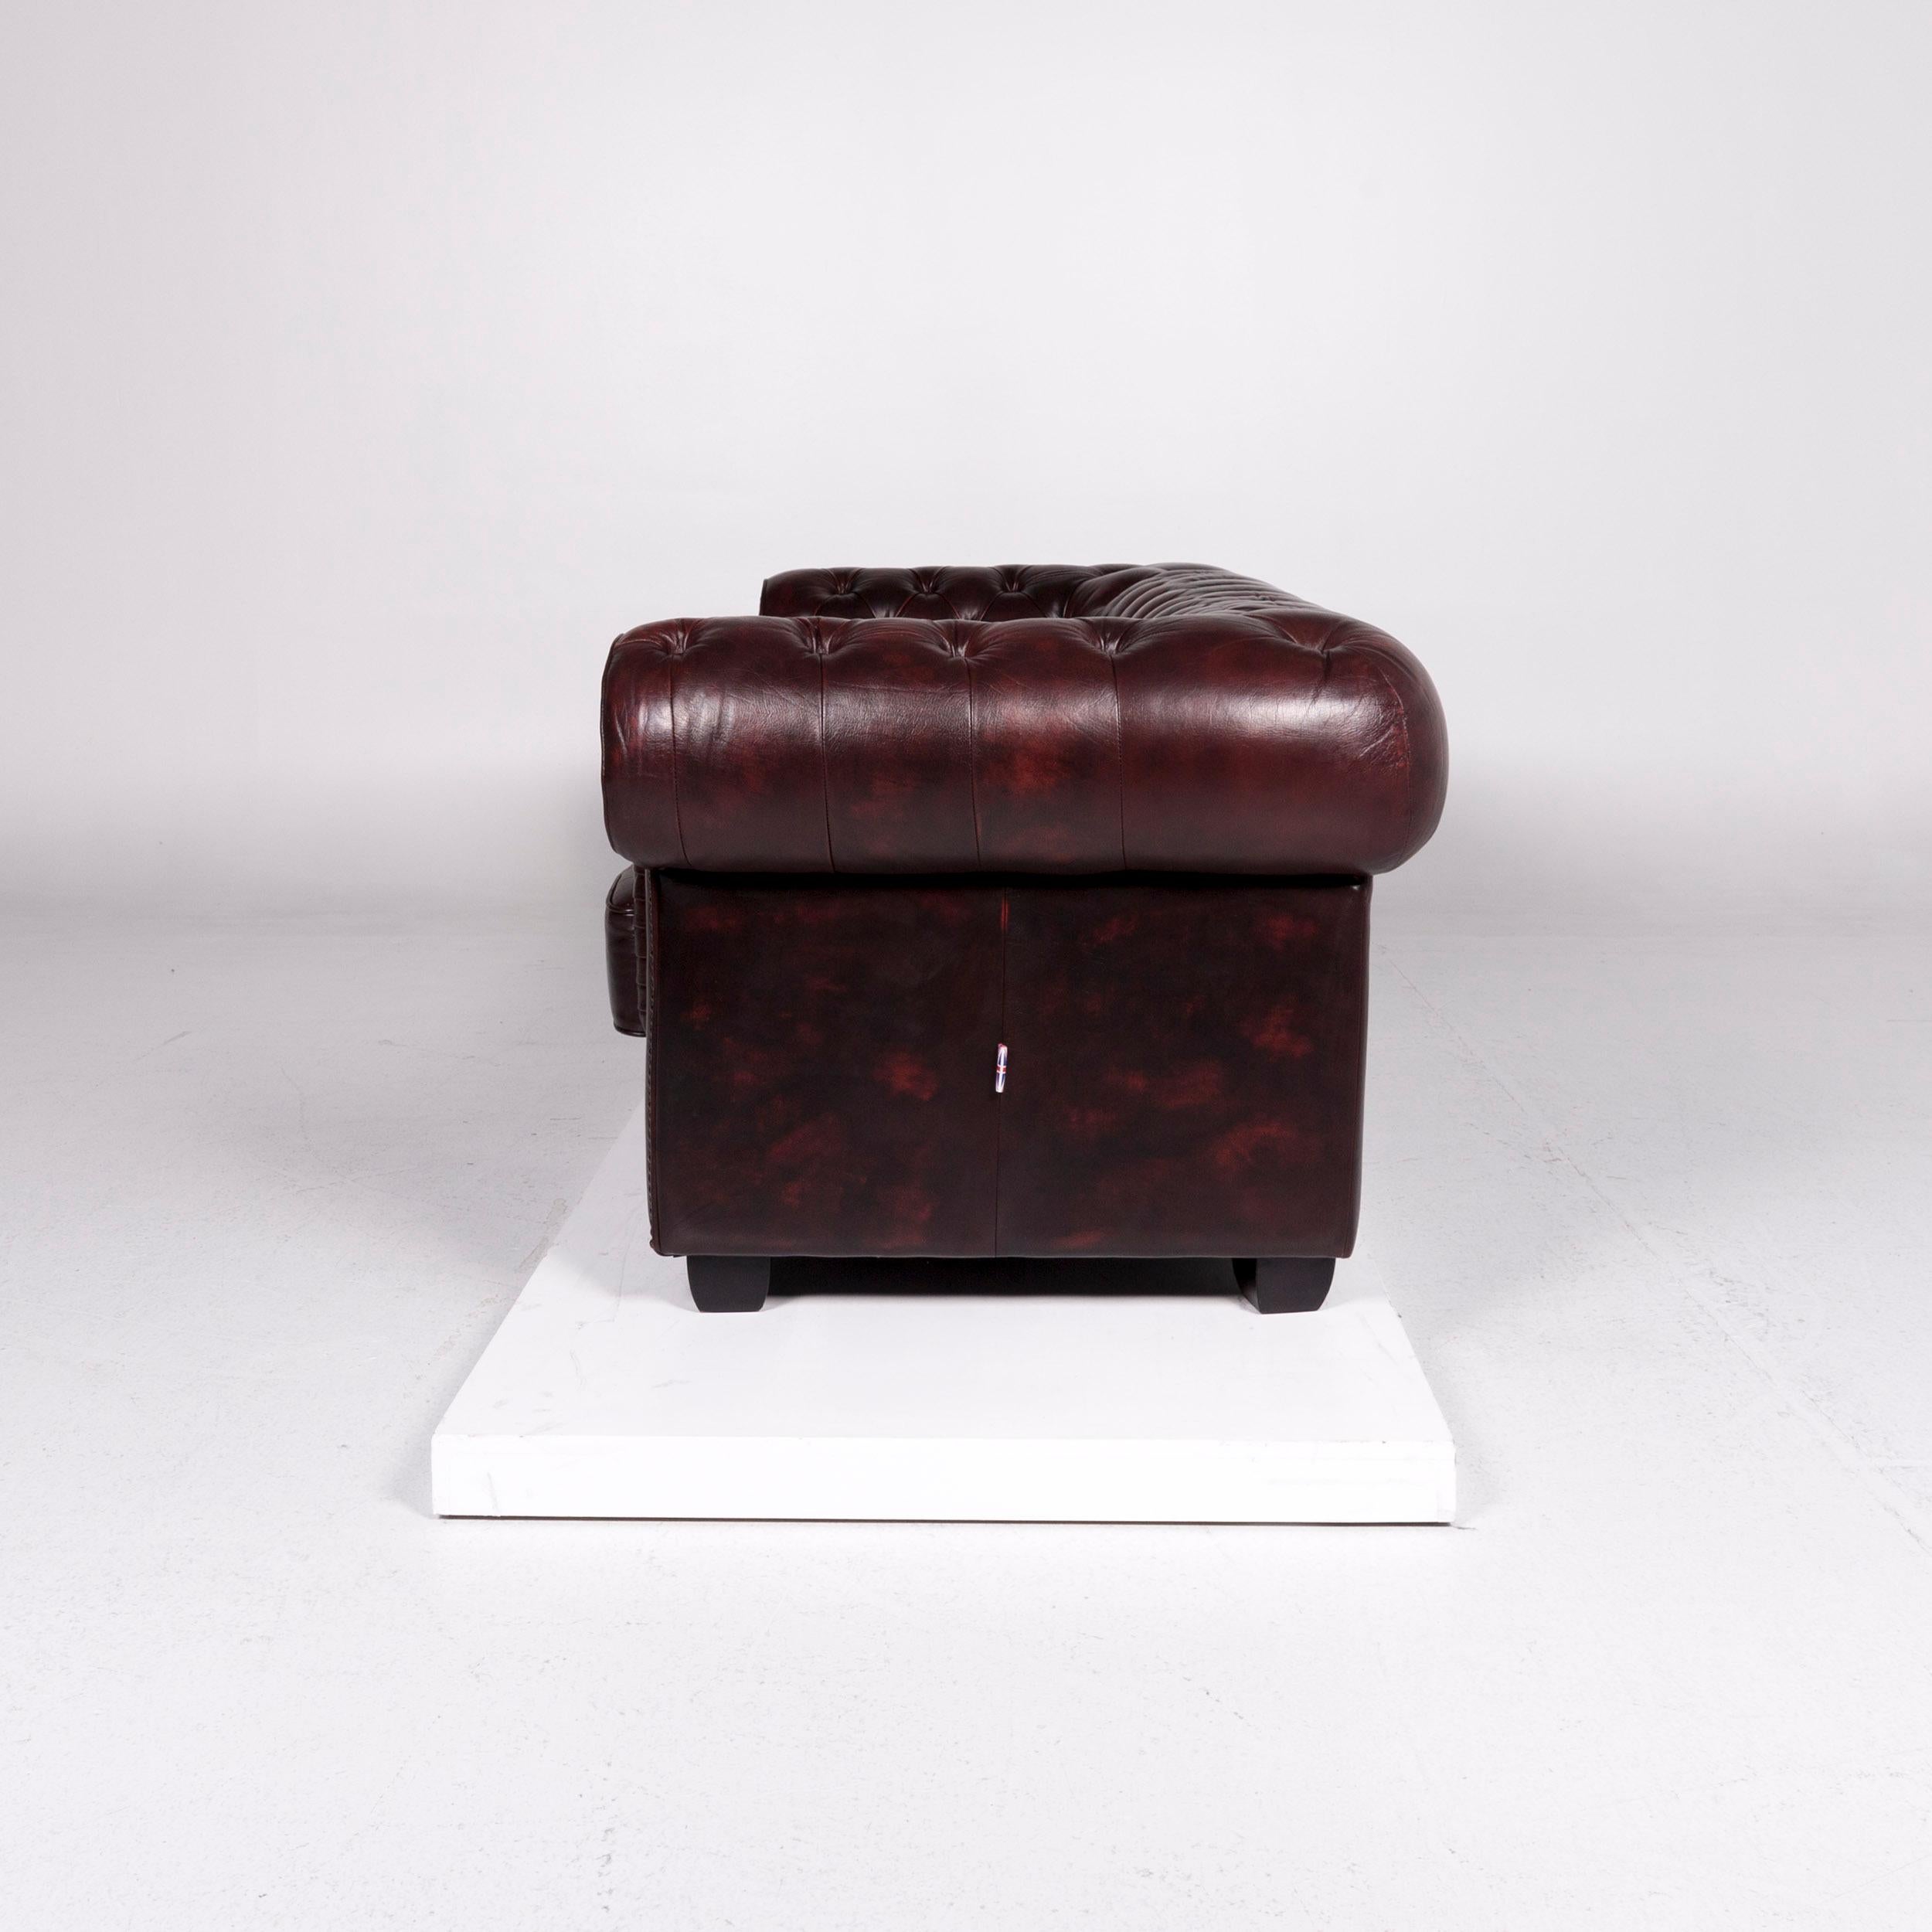 Chesterfield Leather Sofa Red Brown Three-Seat Retro Couch 2